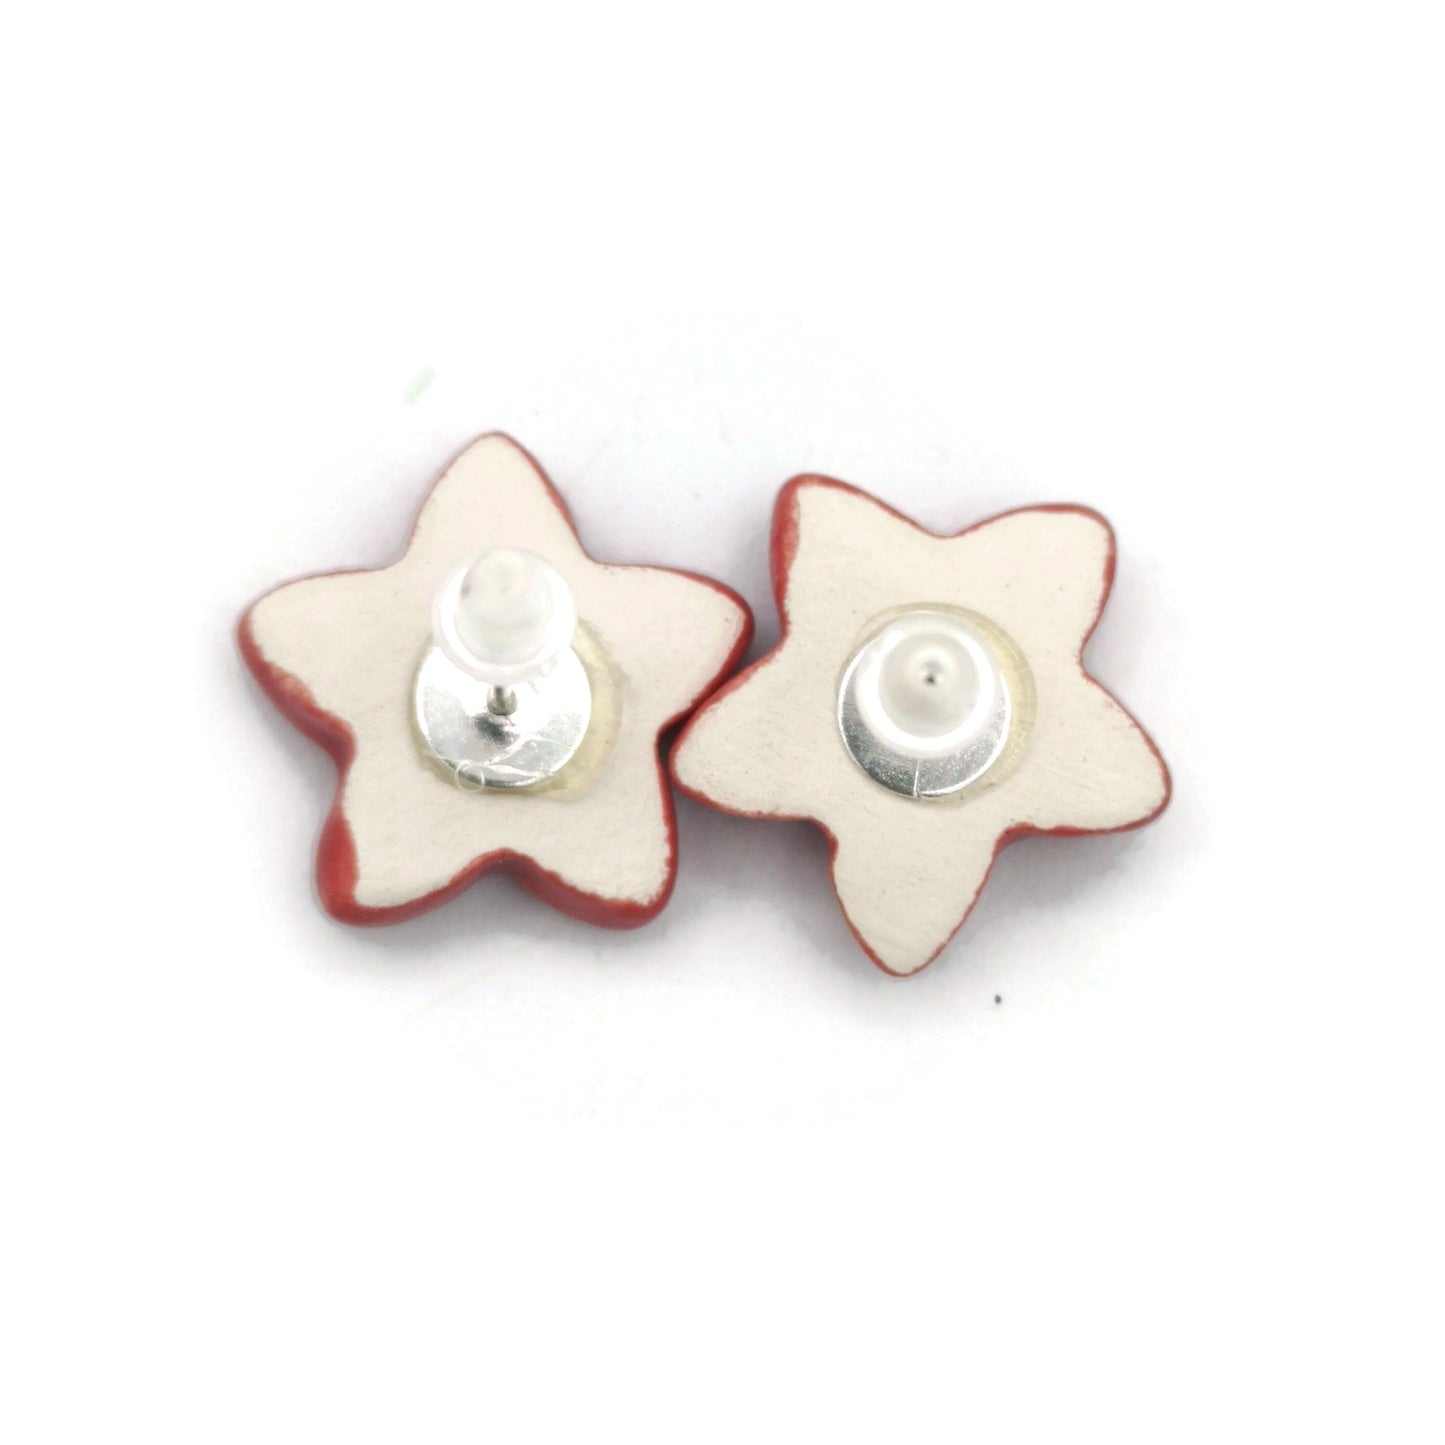 Handmade Red Star Stud Earrings Fo Women, Ceramic Jewelry Mothers Day Gift From Daughter, Statement Earrings Best Gifts For Her - Ceramica Ana Rafael